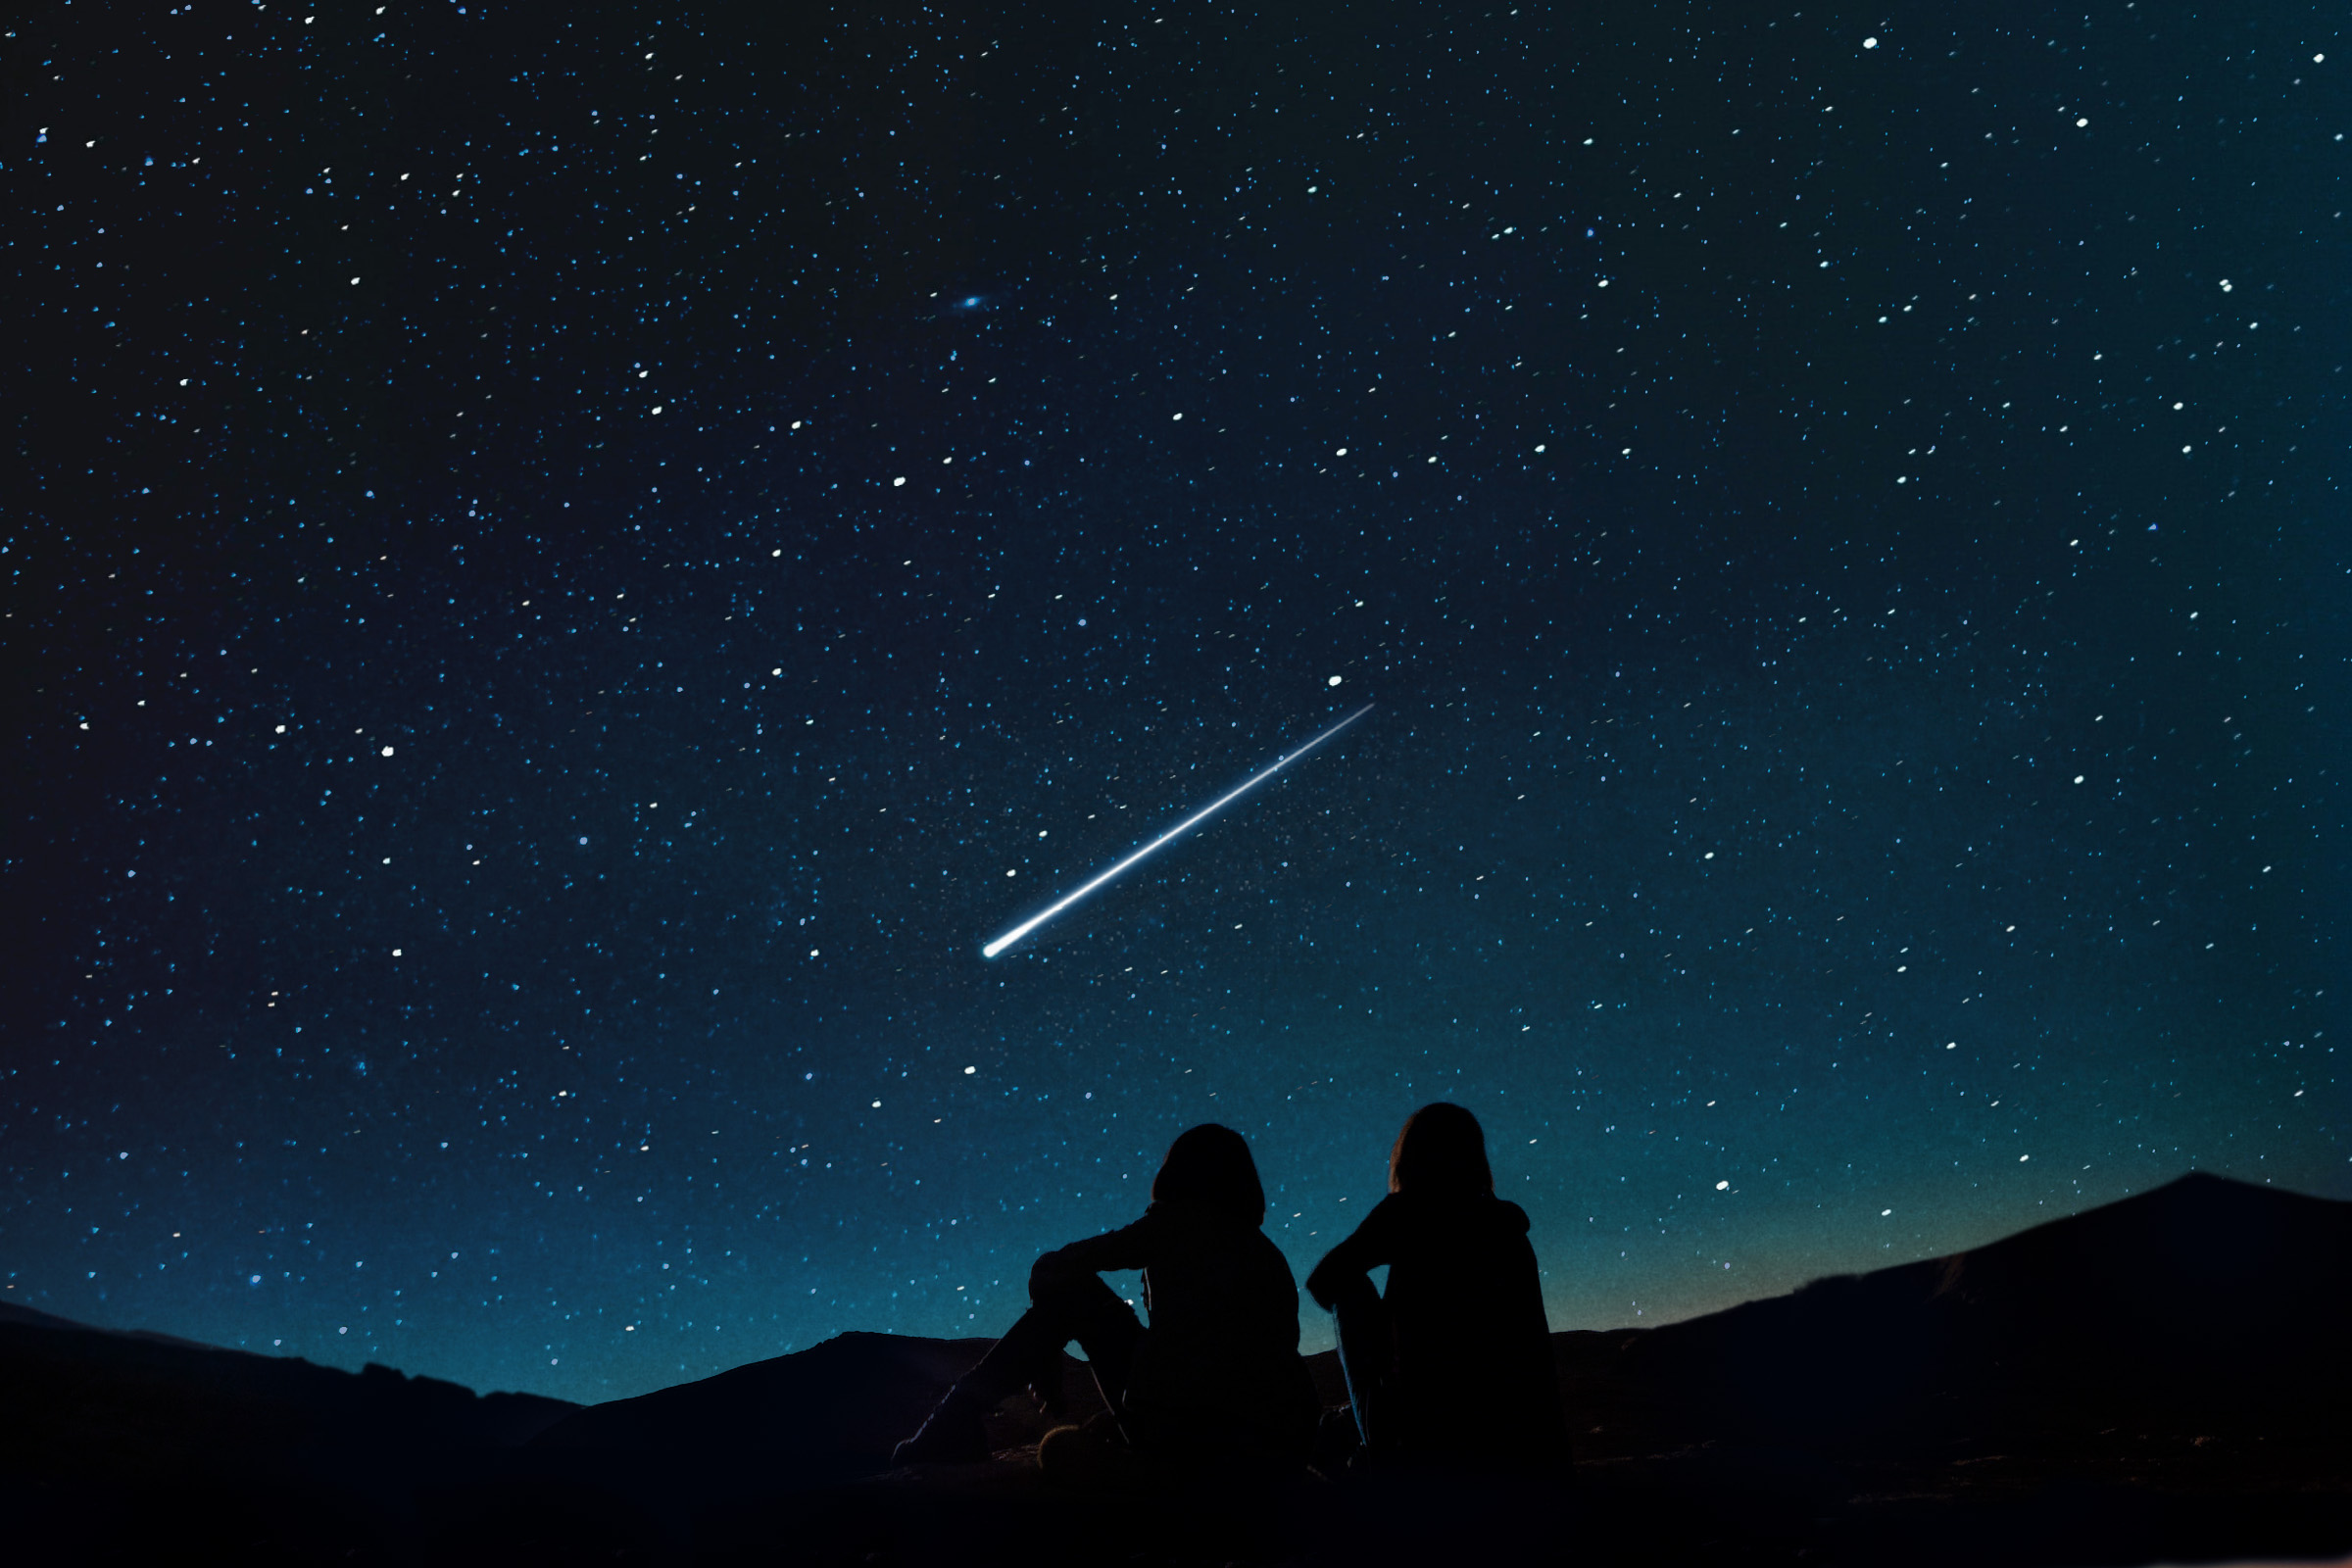 Two people sitting on at a high place looking at a starry sky with a bright shooting star streaking across it.